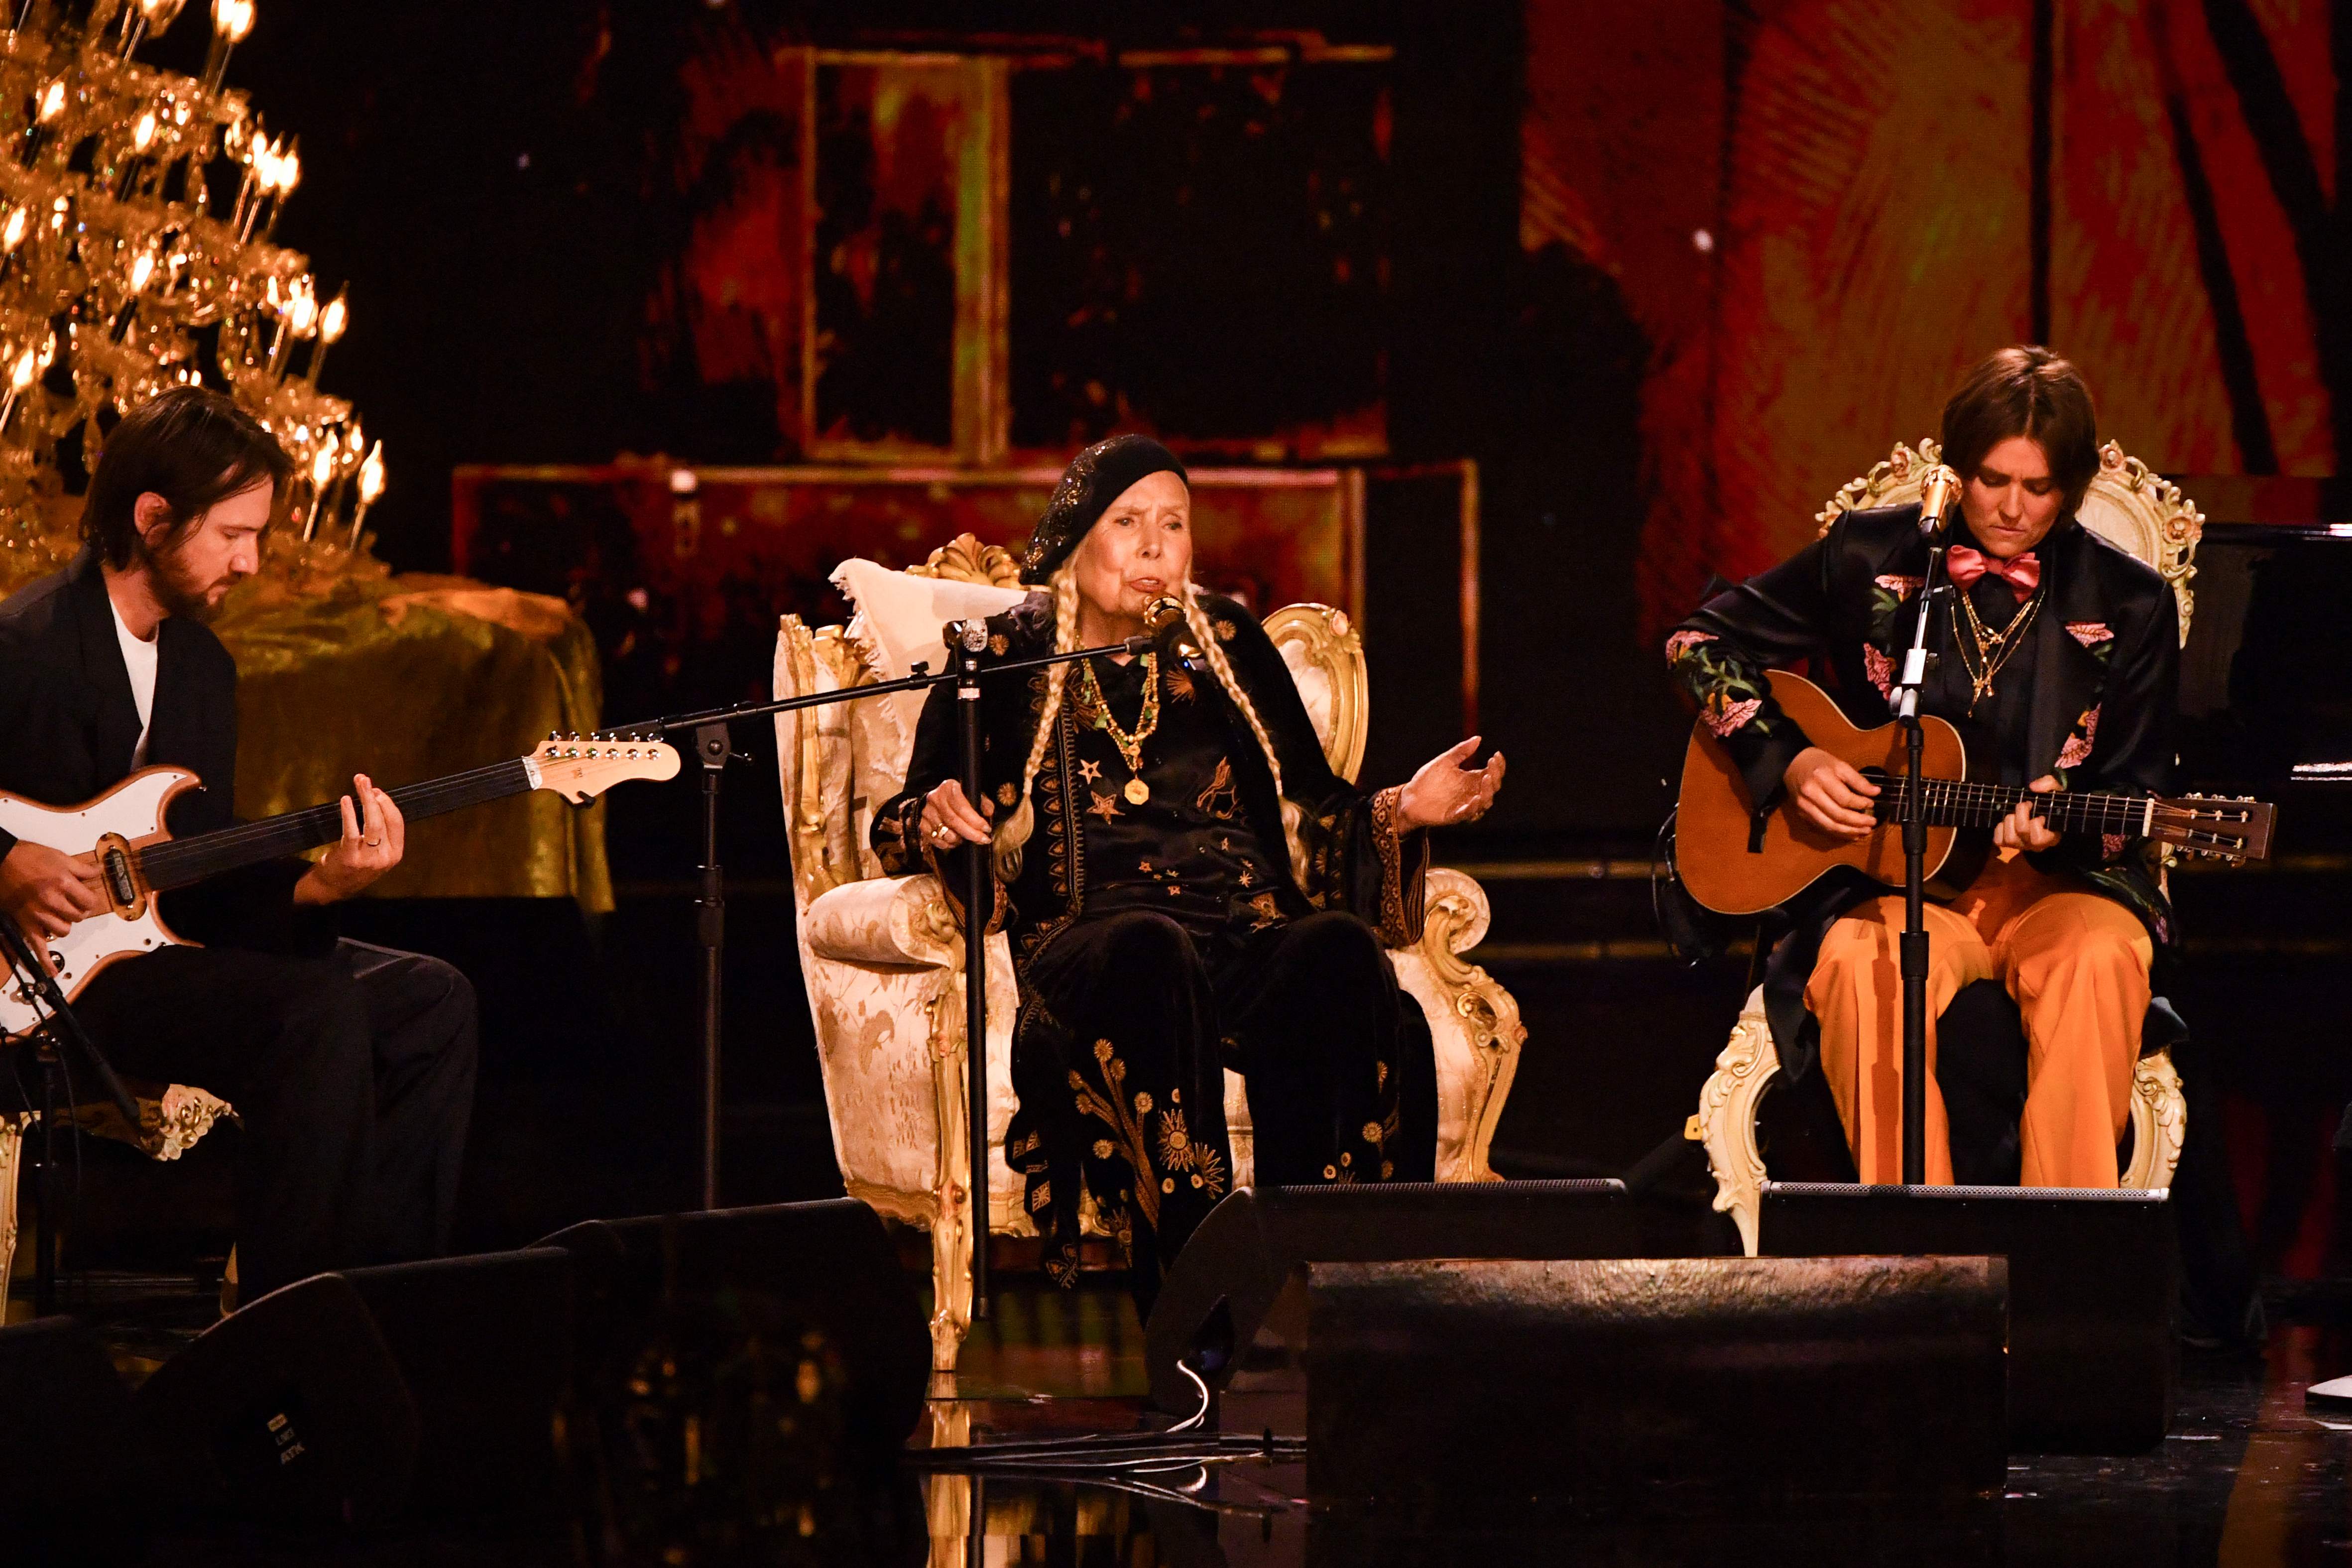 Canadian-US singer-songwriter Joni Mitchell performs on stage during the 66th Annual Grammy Awards 